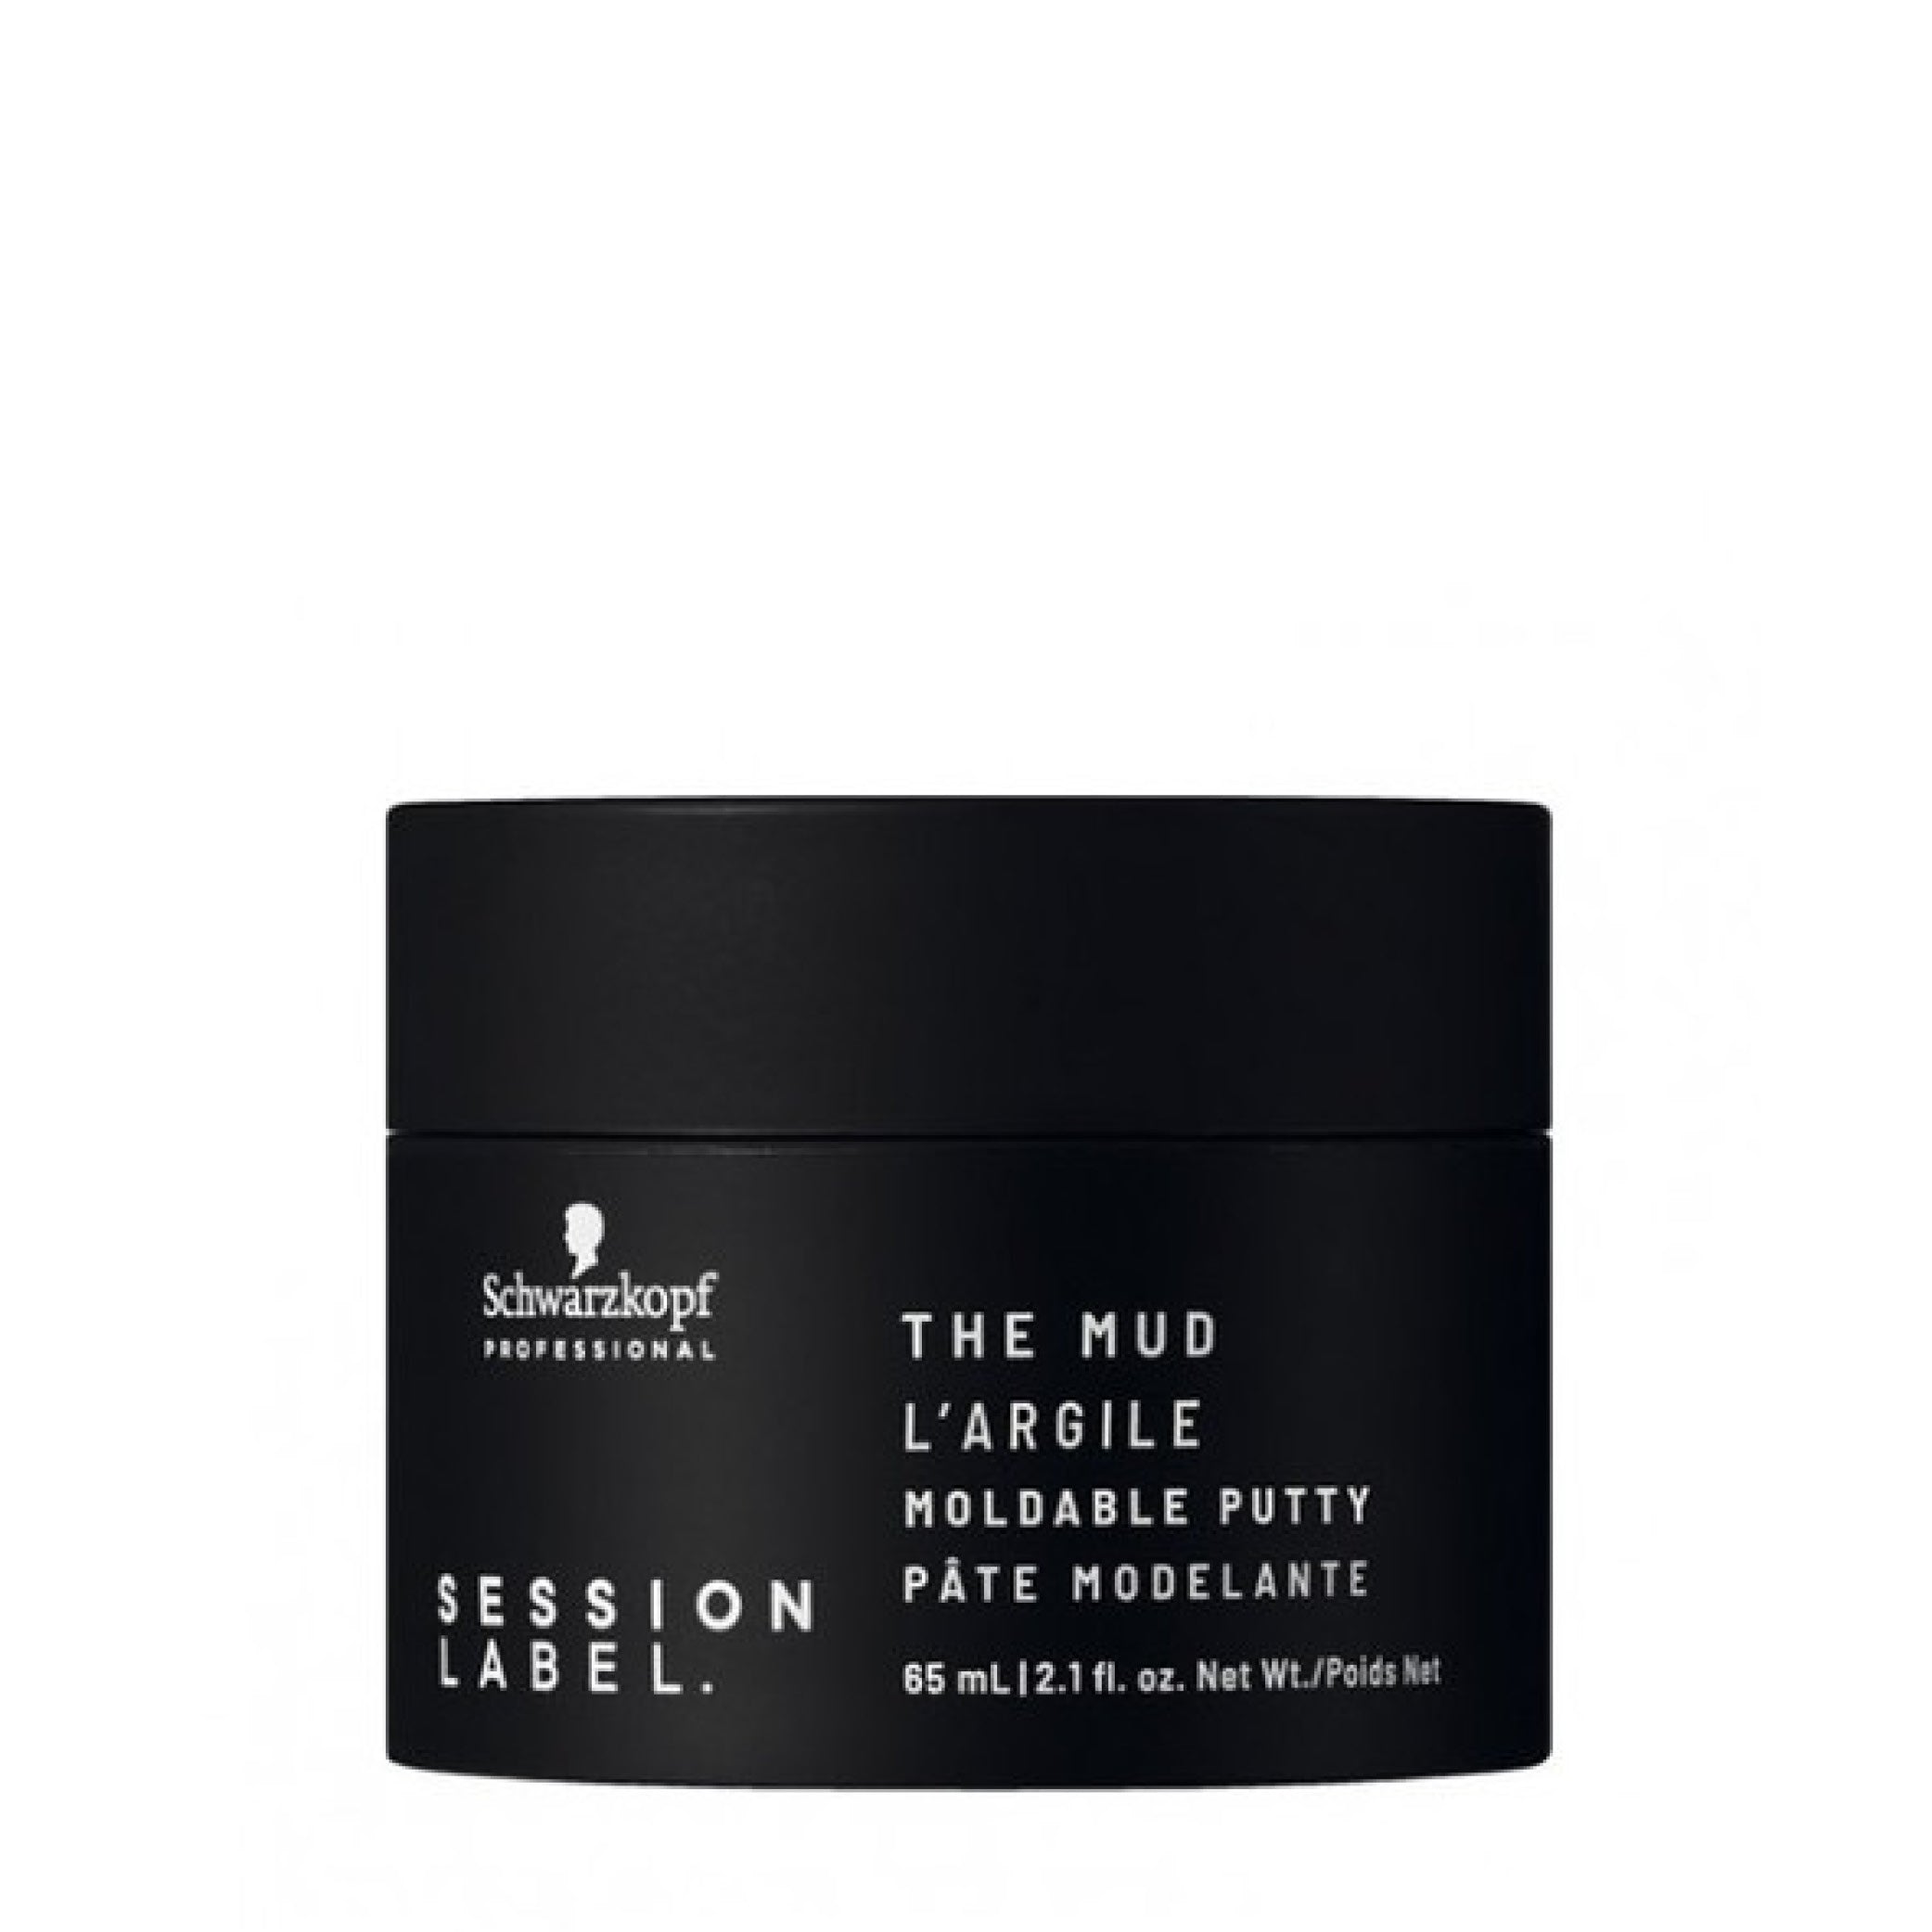 Session Label The Mud Moudable Putty